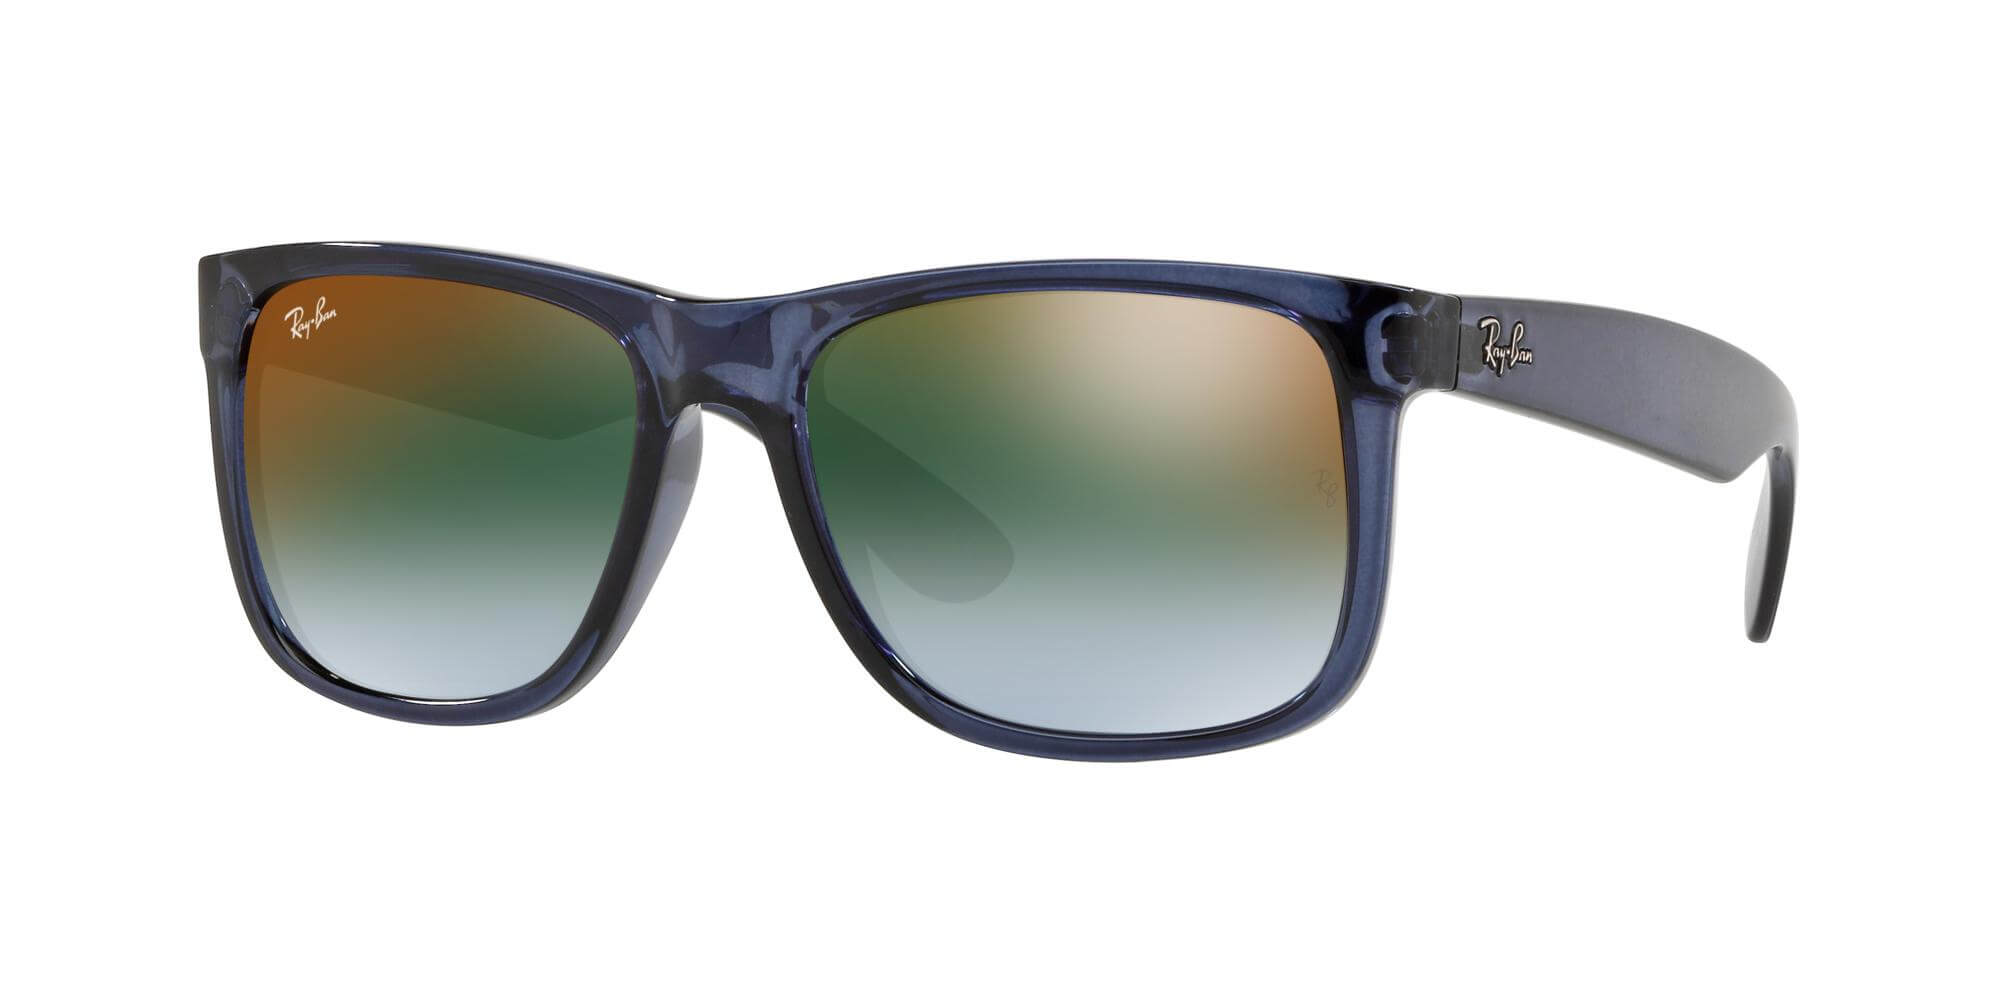 Ray-BanJUSTIN RB 4165Transparent Blue/blue Green Shaded (6341/T0)